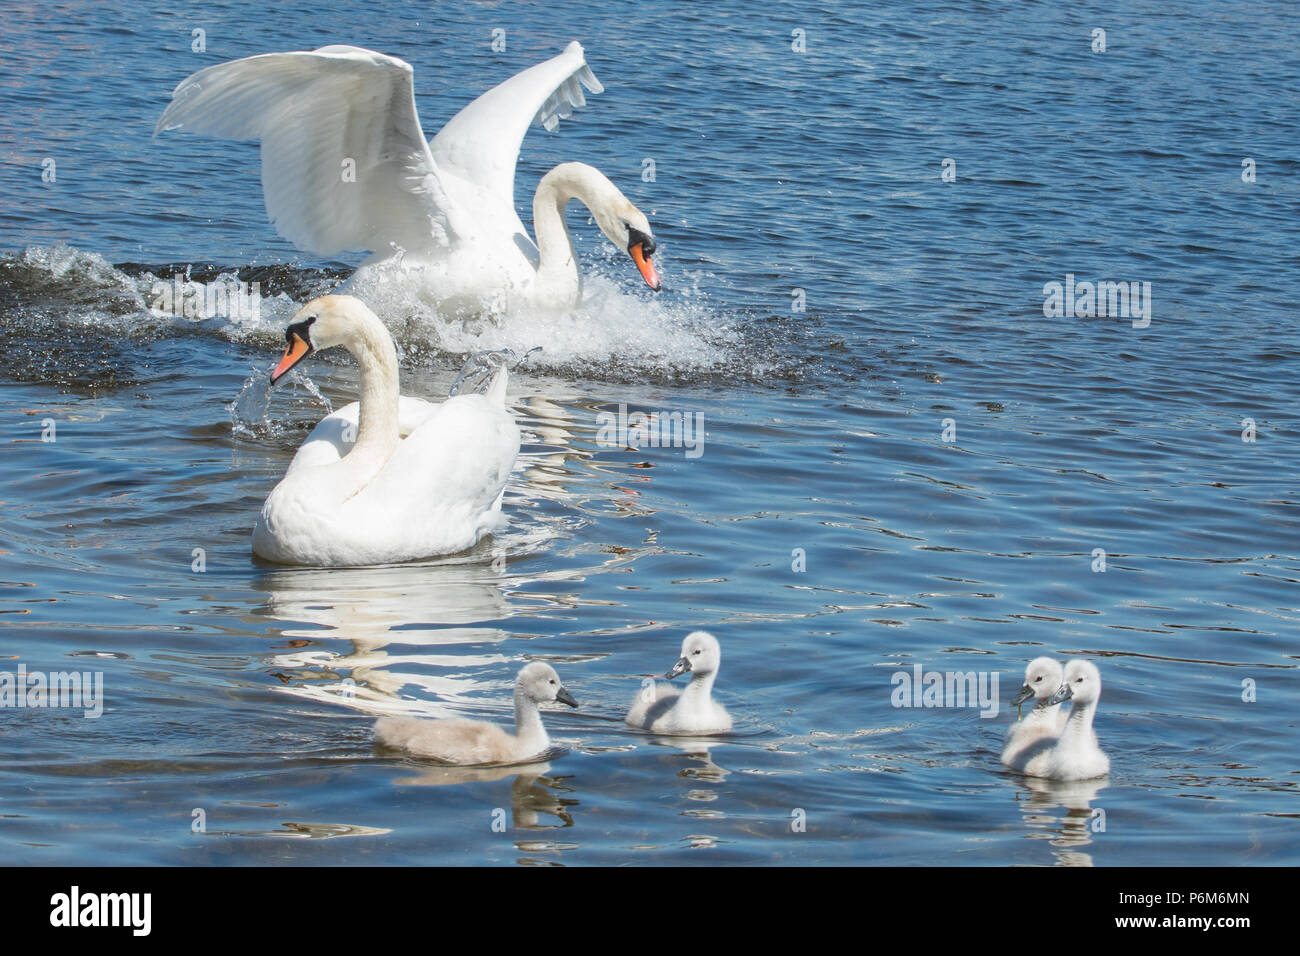 Luss, Loch Lomond, Scotland, UK - 1 July 2018: uk weather - a family of swans at Luss beach, Loch Lomond as temperatures rise Credit: Kay Roxby/Alamy Live News Stock Photo